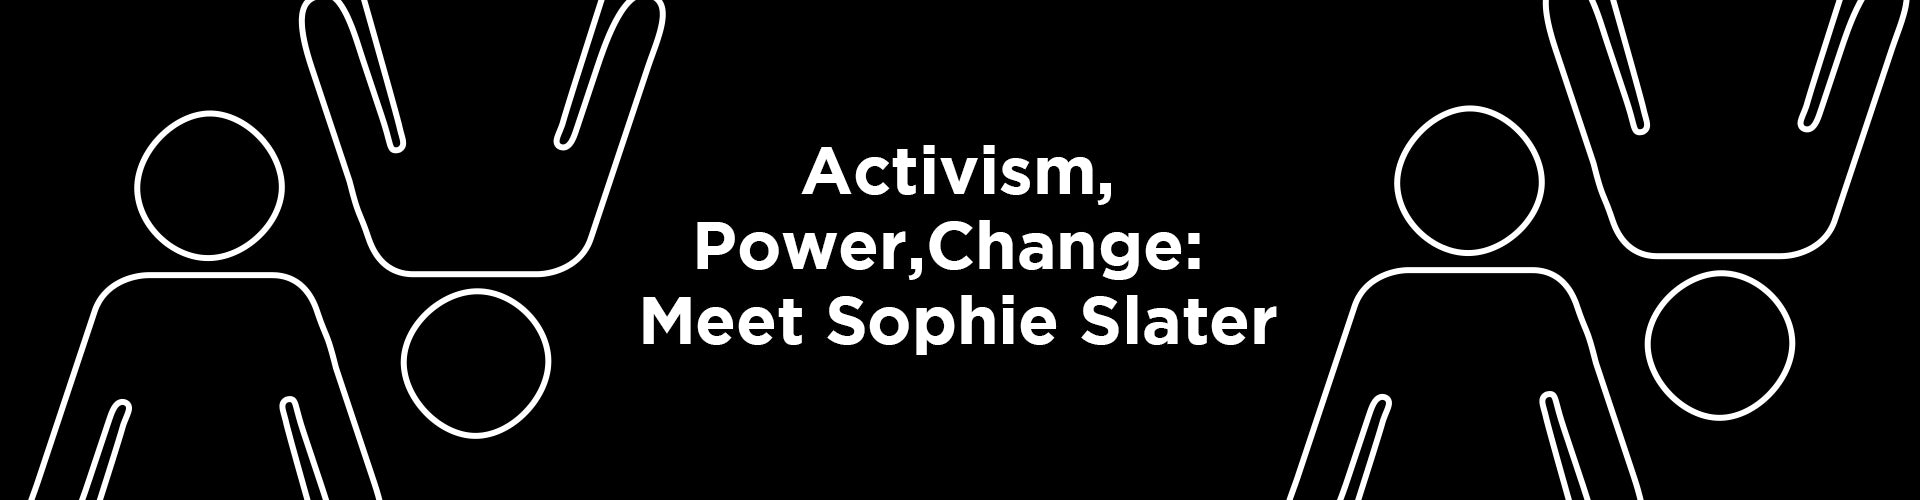 Activism, Power, and Change: Meet Sophie Slater